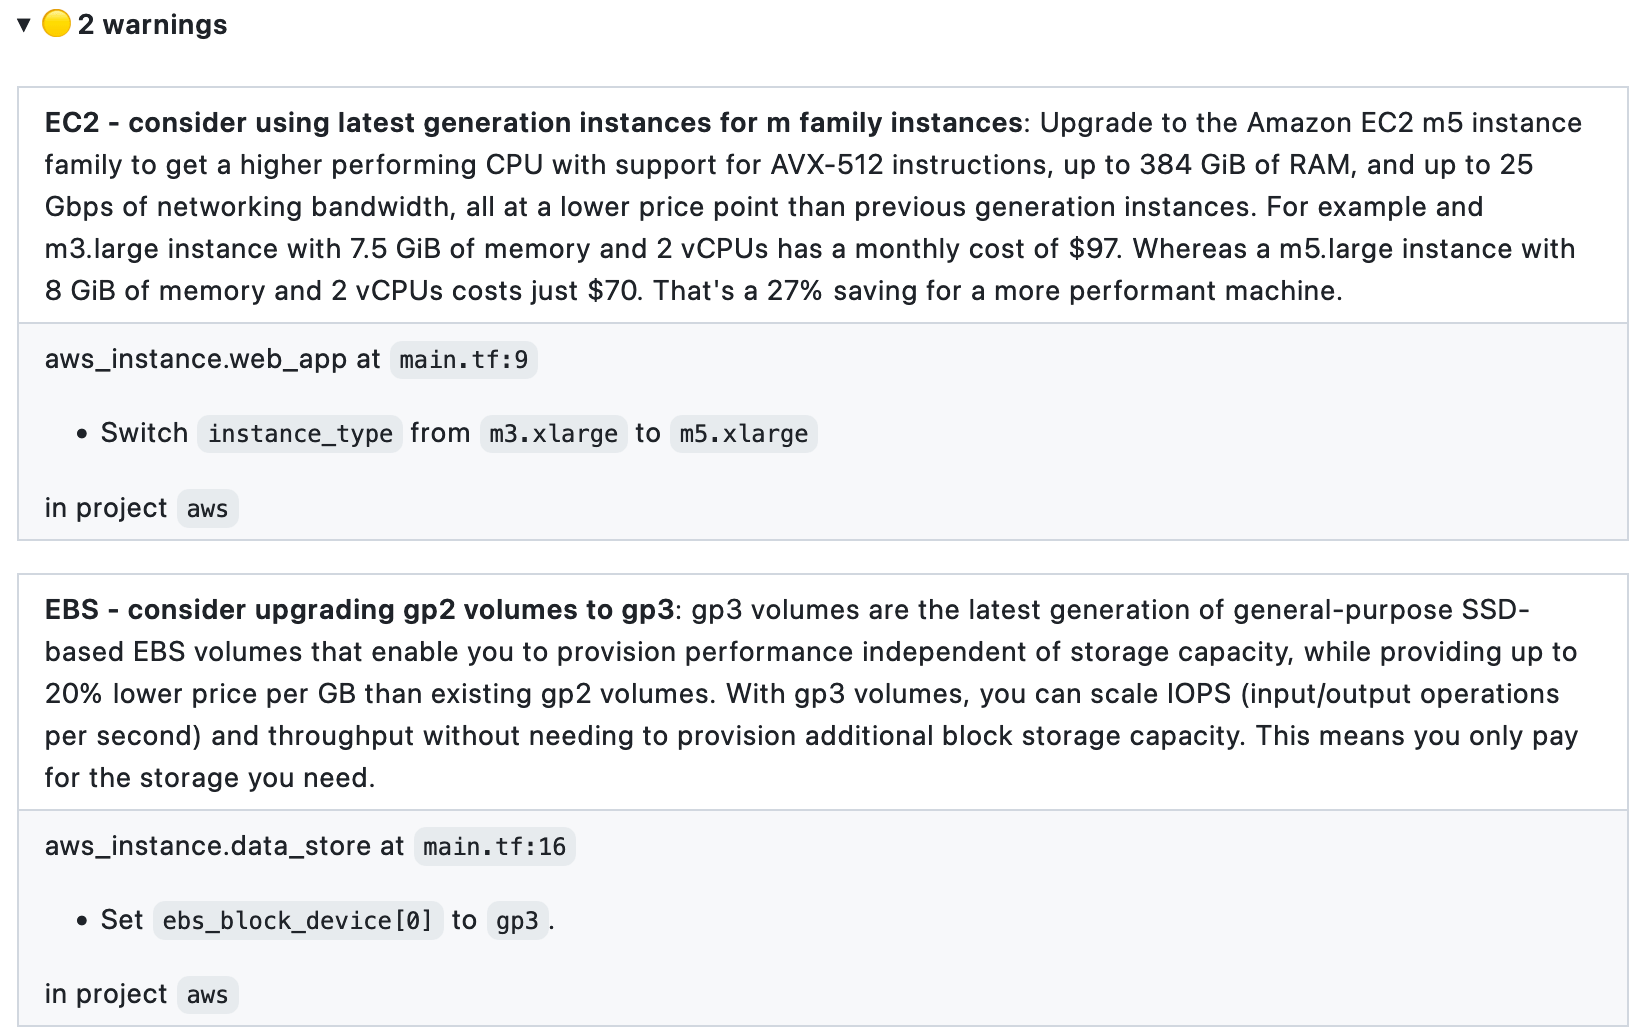 The pull request comment shows exactly what file and line number need to be updated to fix the issue.